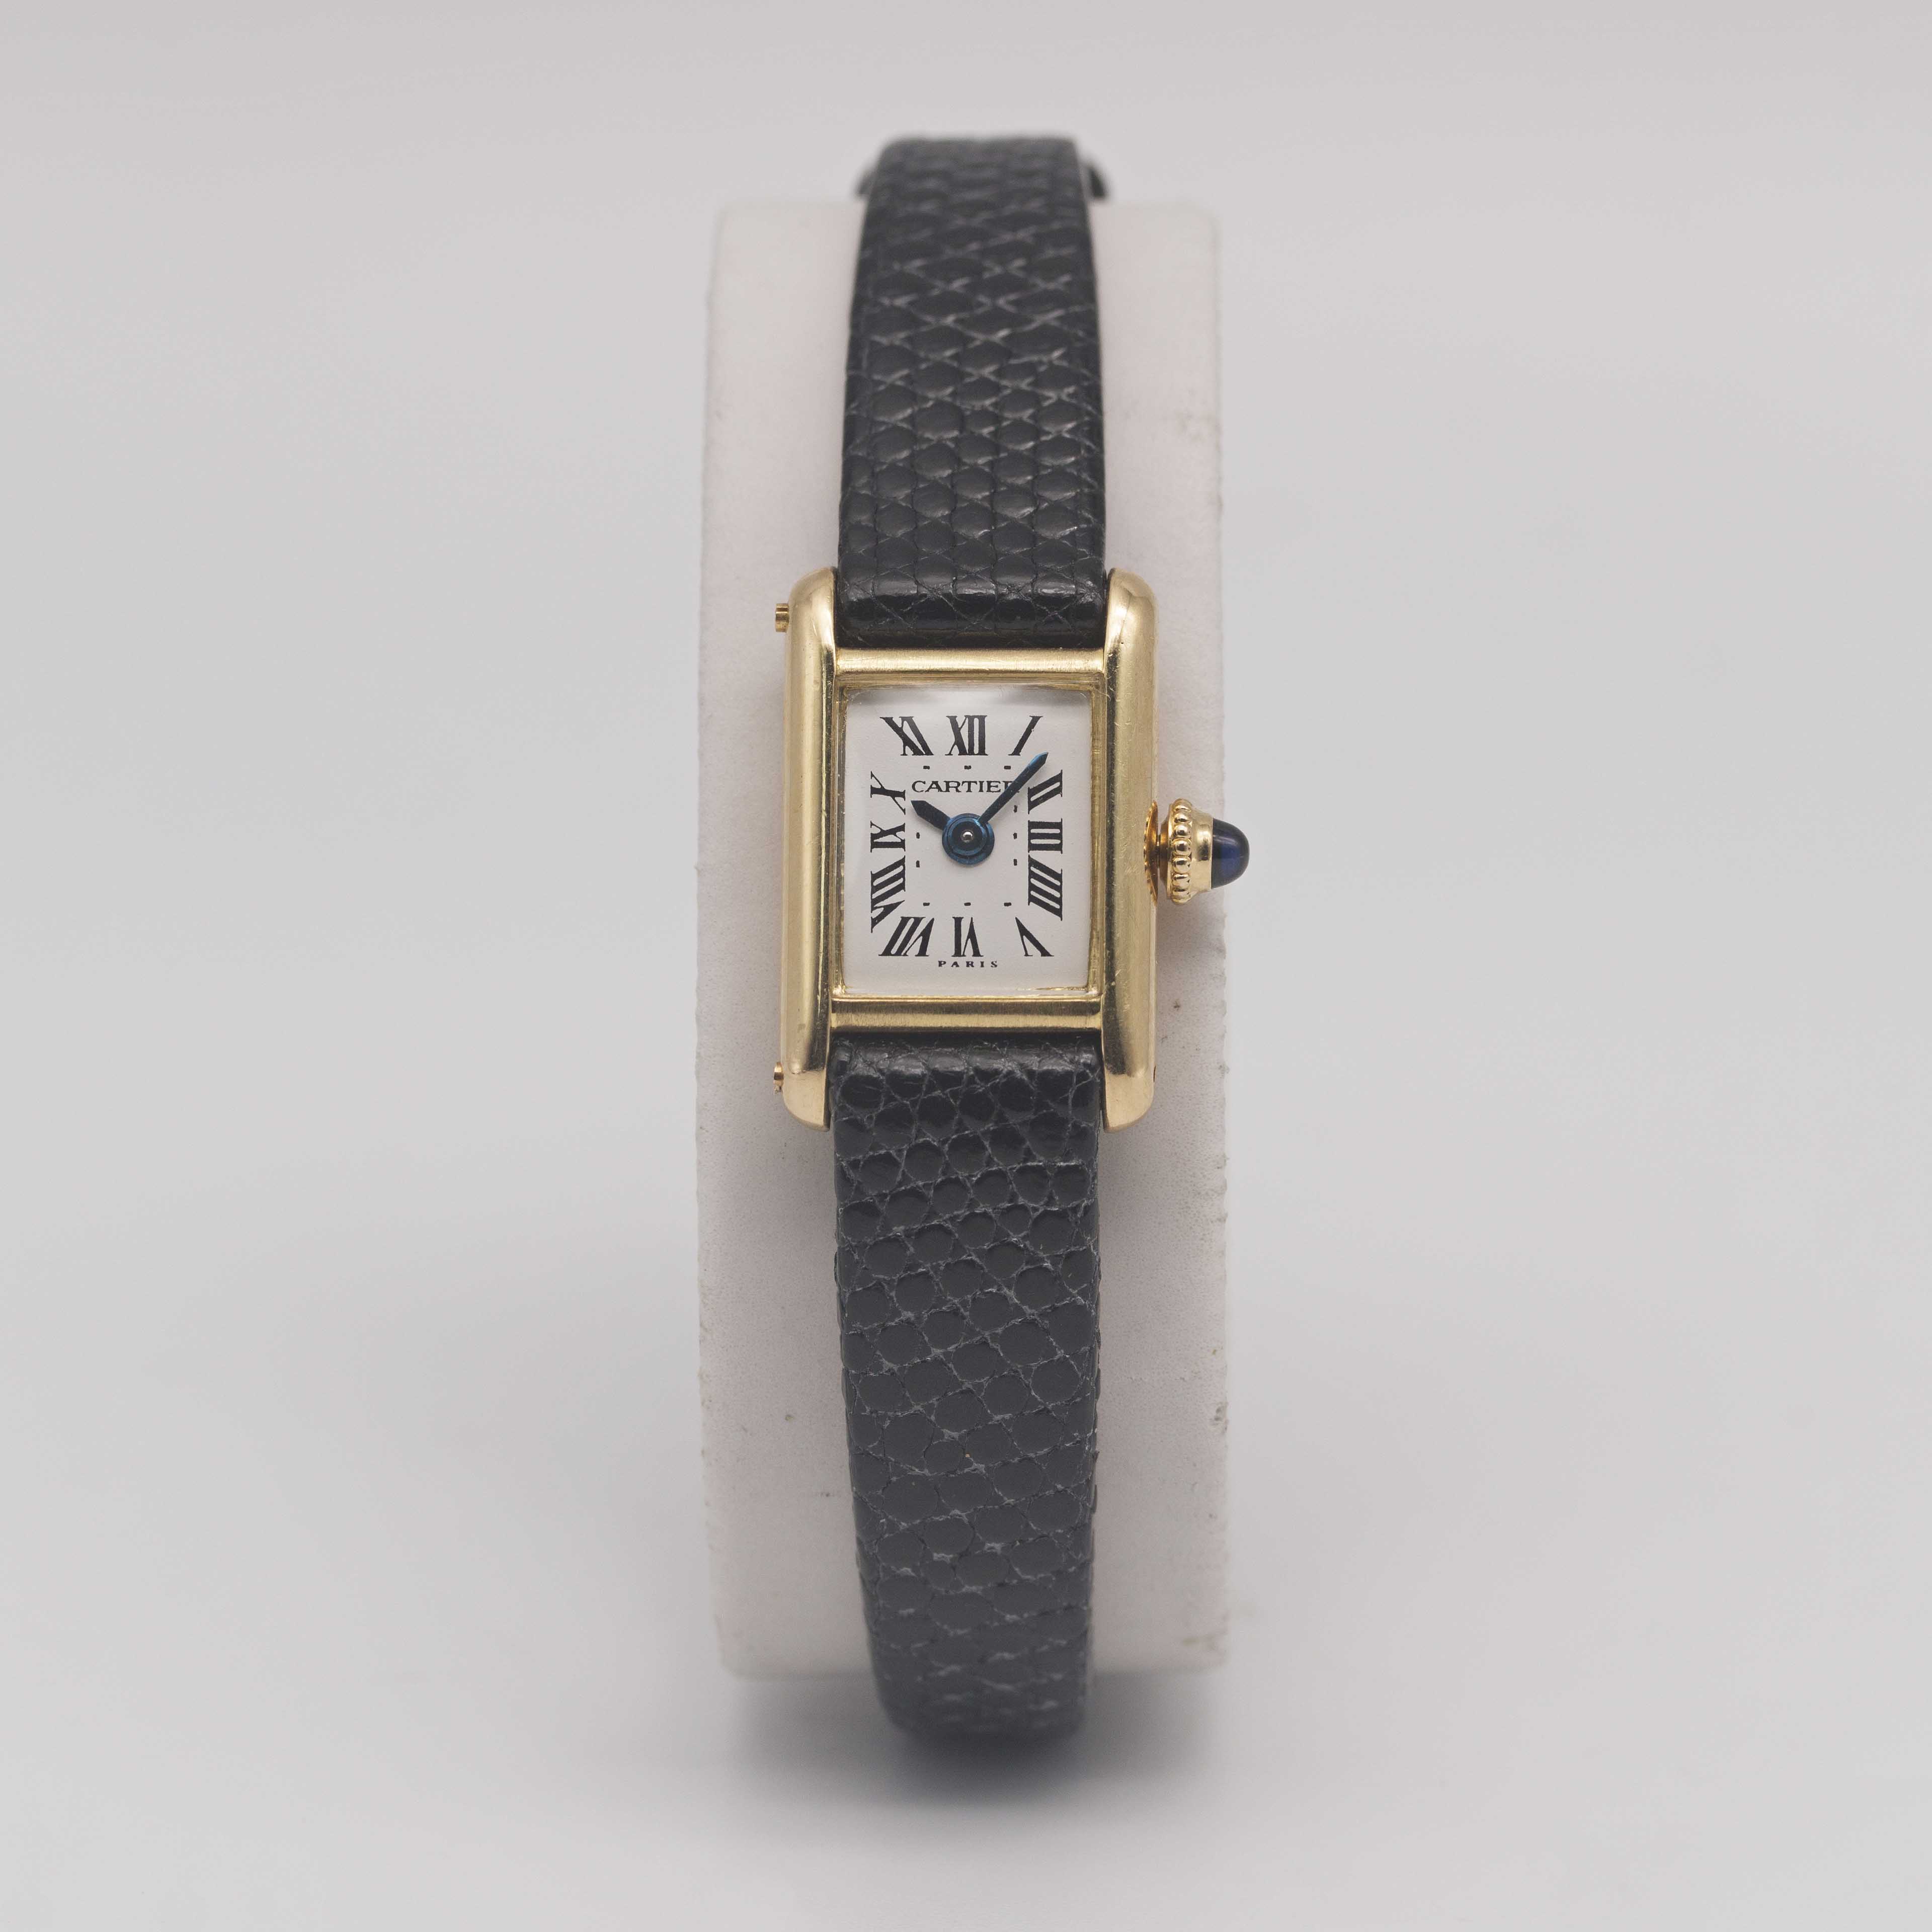 A LADIES 18K SOLID GOLD CARTIER PARIS "MINI" TANK WRIST WATCH CIRCA 1970s, WITH MANUAL WIND CAL. 845 - Image 2 of 11